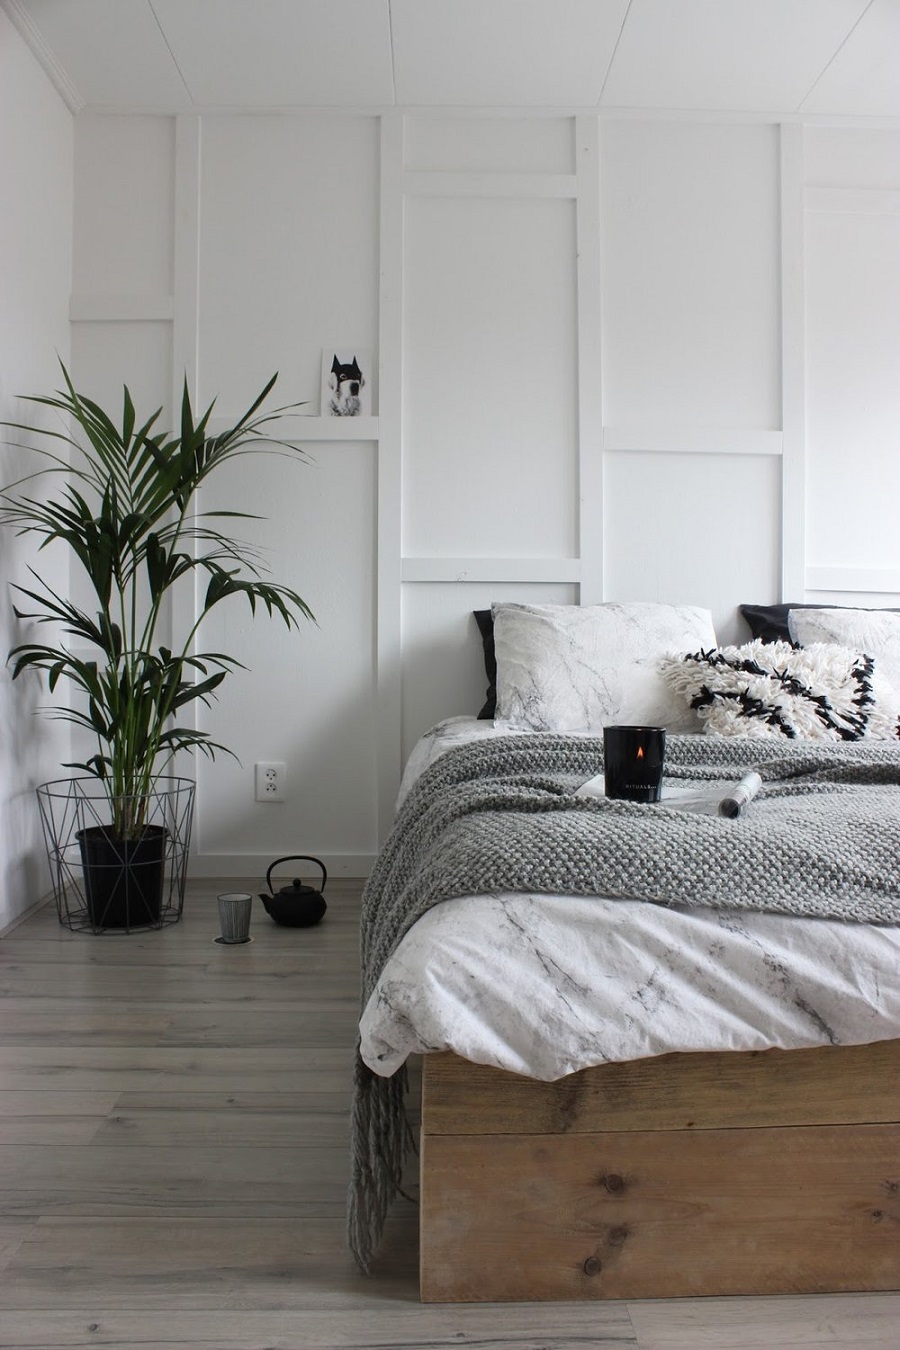 Minimalist Bedroom Decor Ideas You Should Try at Home